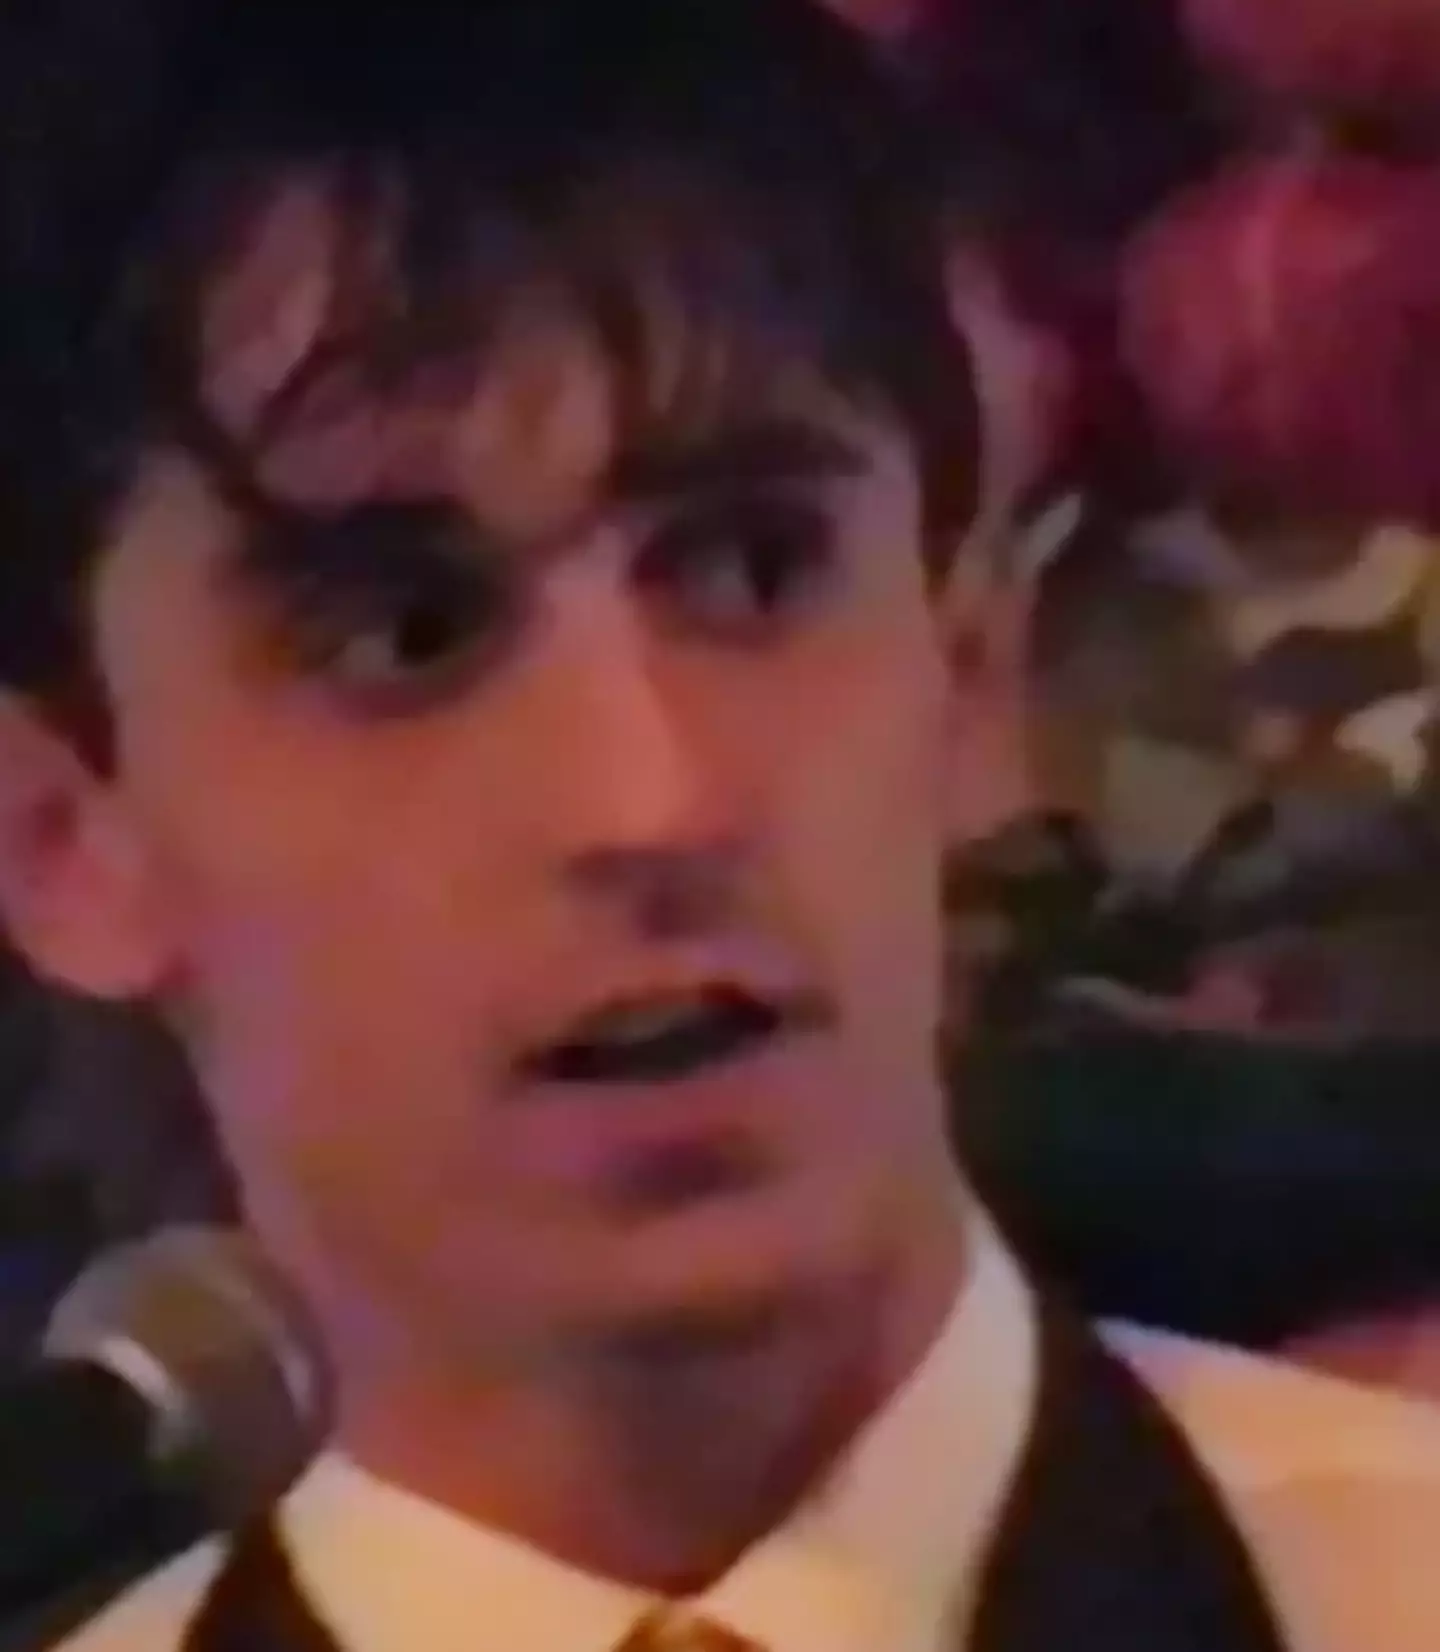 A young Gary Neville took to the stand to deliver an X-rated joke about the Spice Girls during Posh and Becks' 90s wedding.